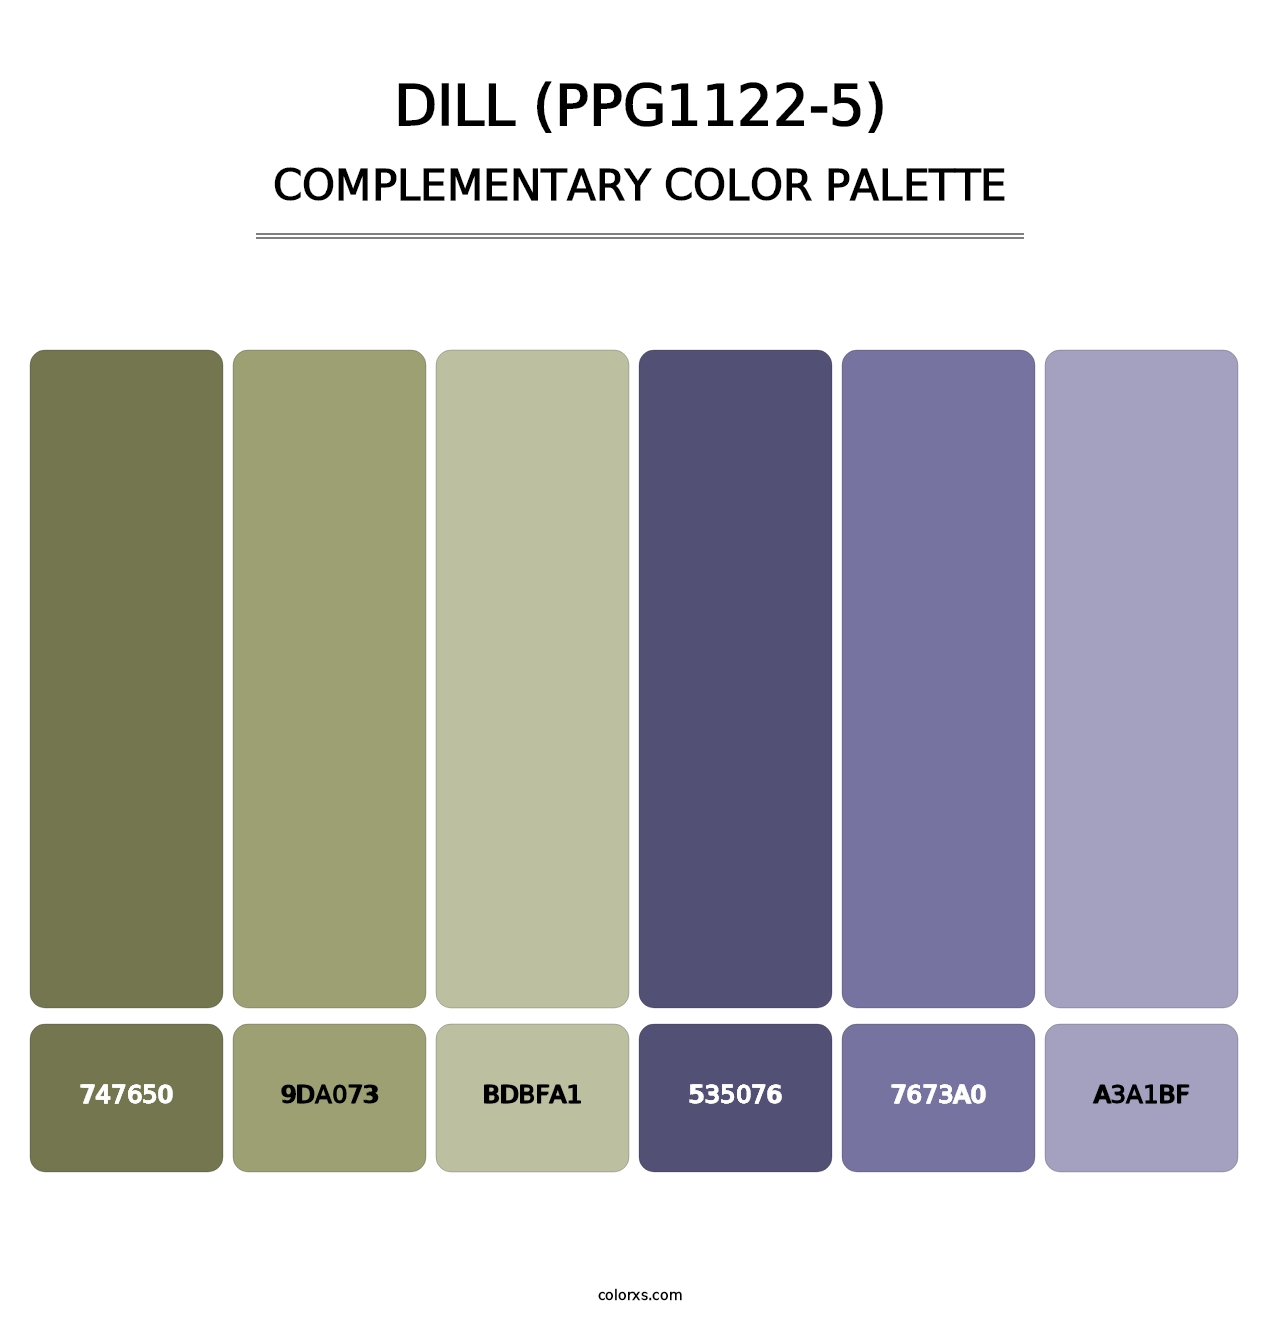 Dill (PPG1122-5) - Complementary Color Palette